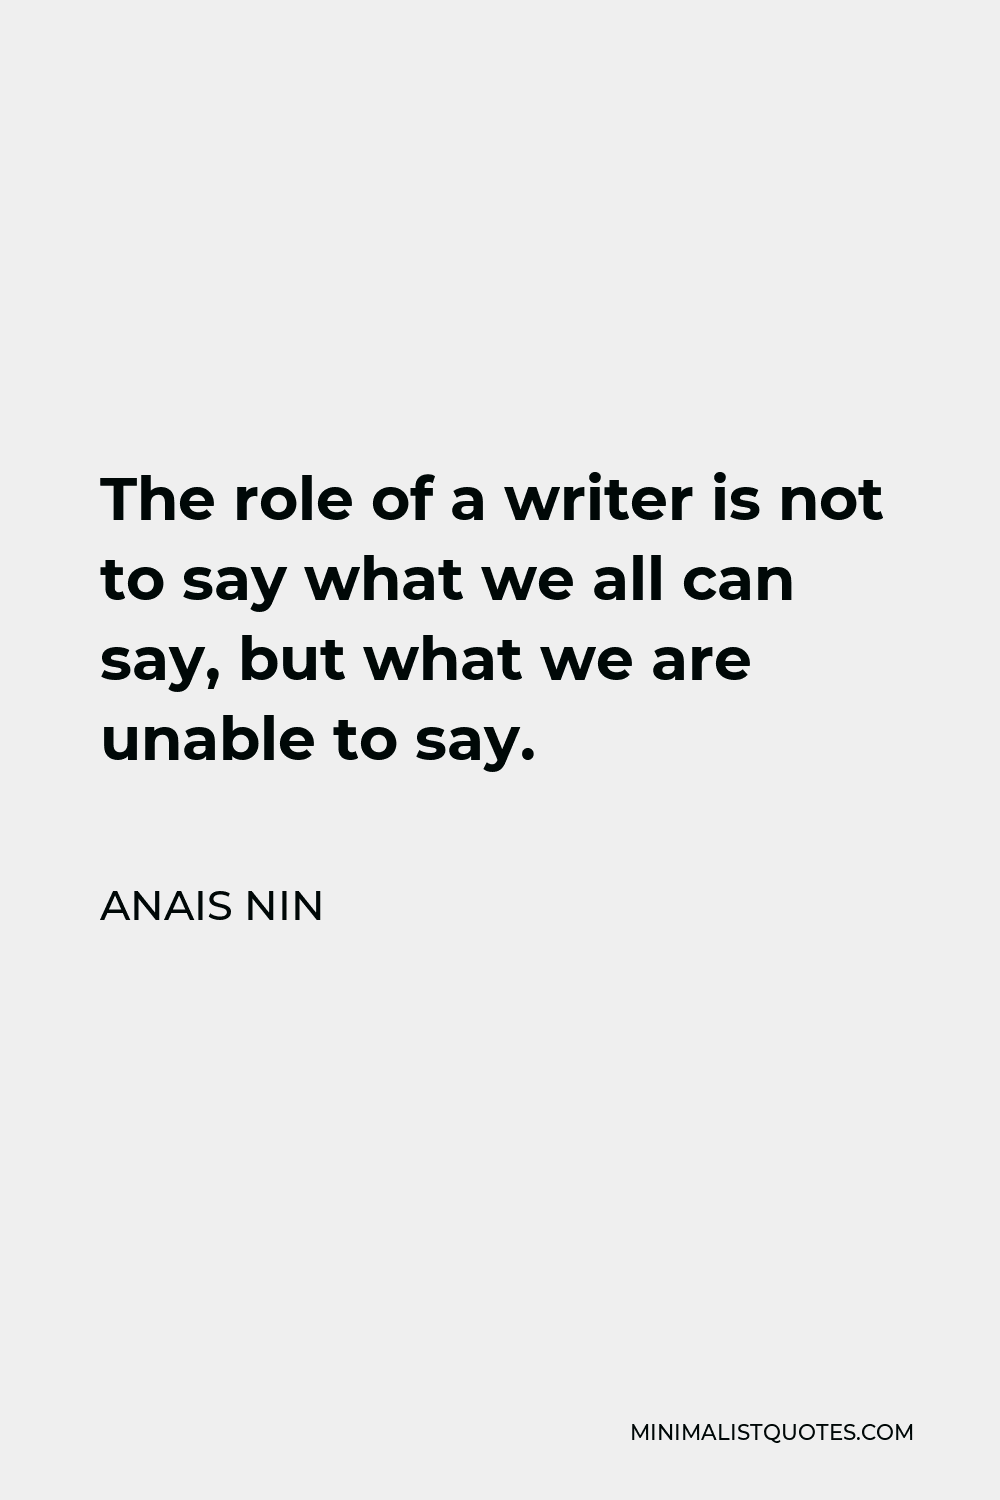 Anais Nin Quote - The role of a writer is not to say what we all can say, but what we are unable to say.